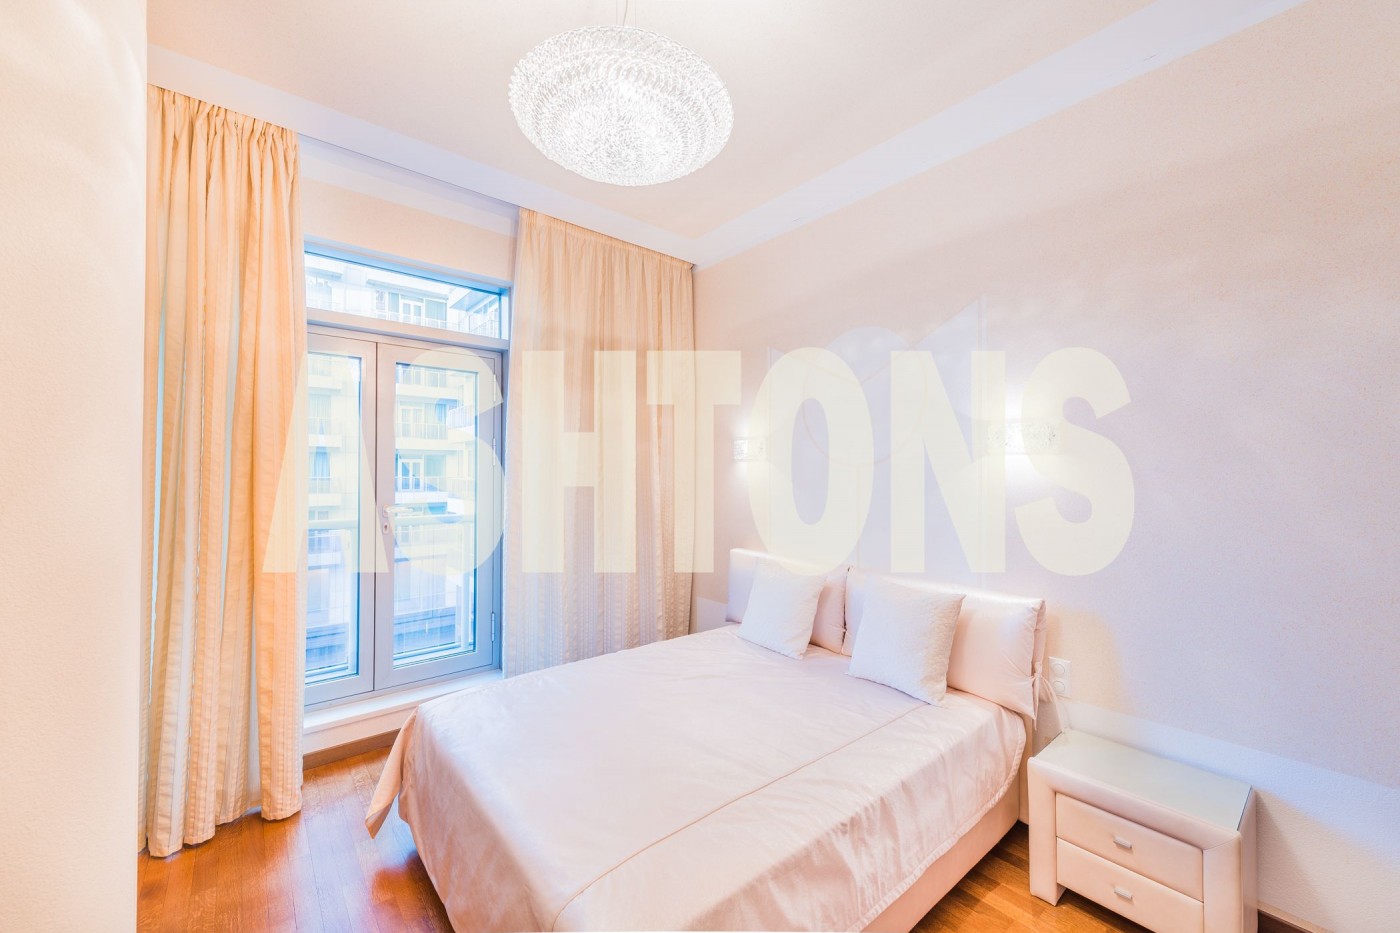 EXCLUSIVE OFFER IN ELITE RESIDENTIAL COMPLEX "FOUR WINDS". APARTMENT FOR RENT. REAL ESTATE AGENCY ASHTONS INTERNATIONAL REALTY ASHTONS.RU